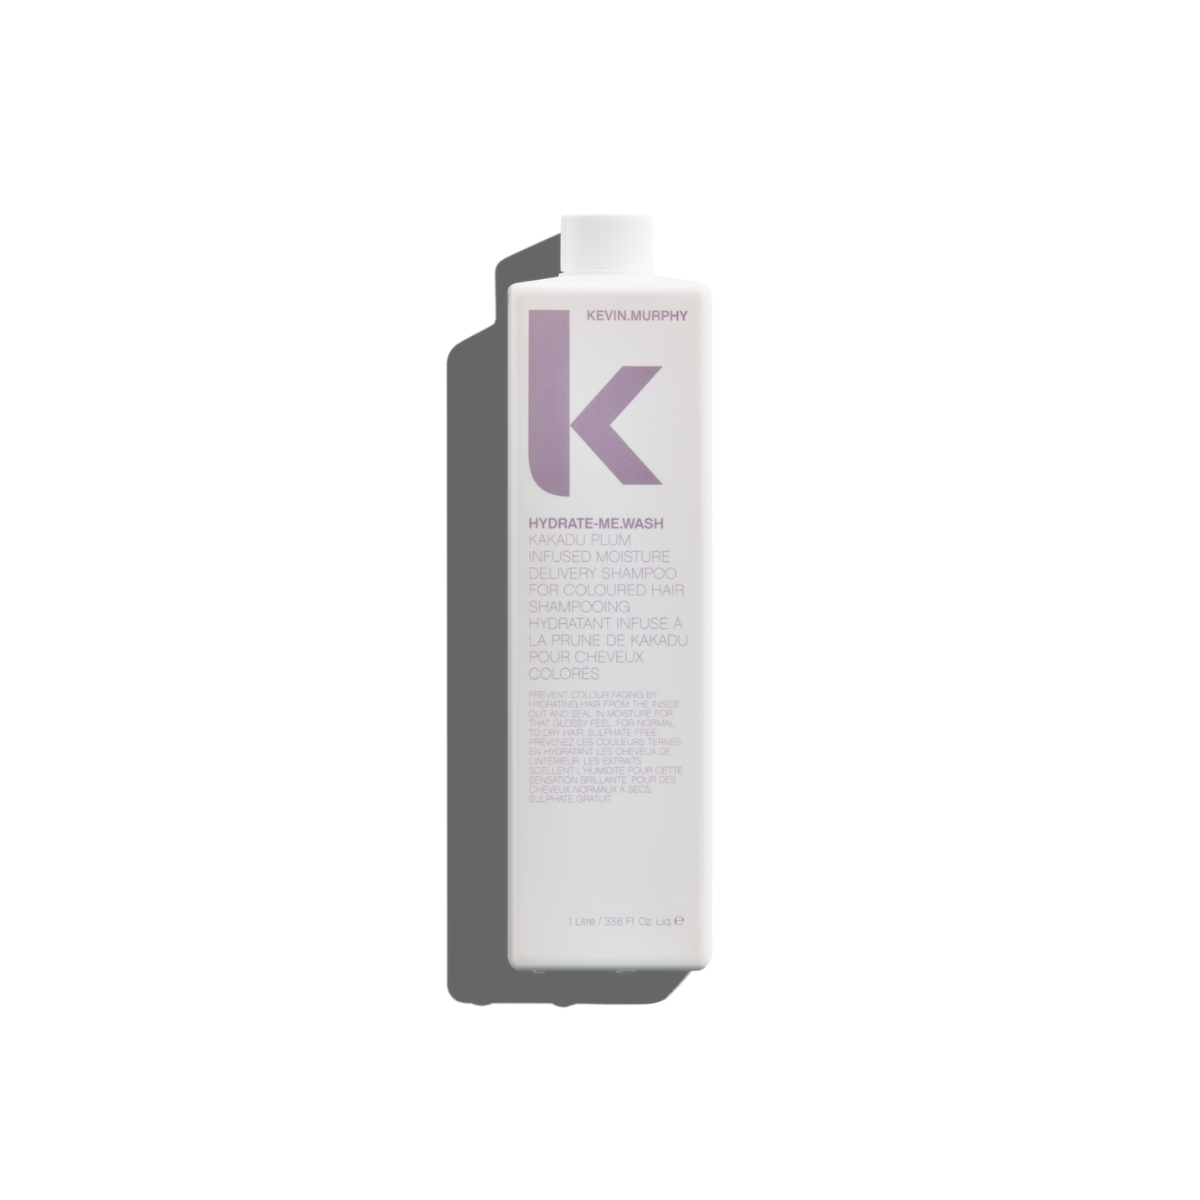 KEVIN.MURPHY HYDRATE.ME.WASH